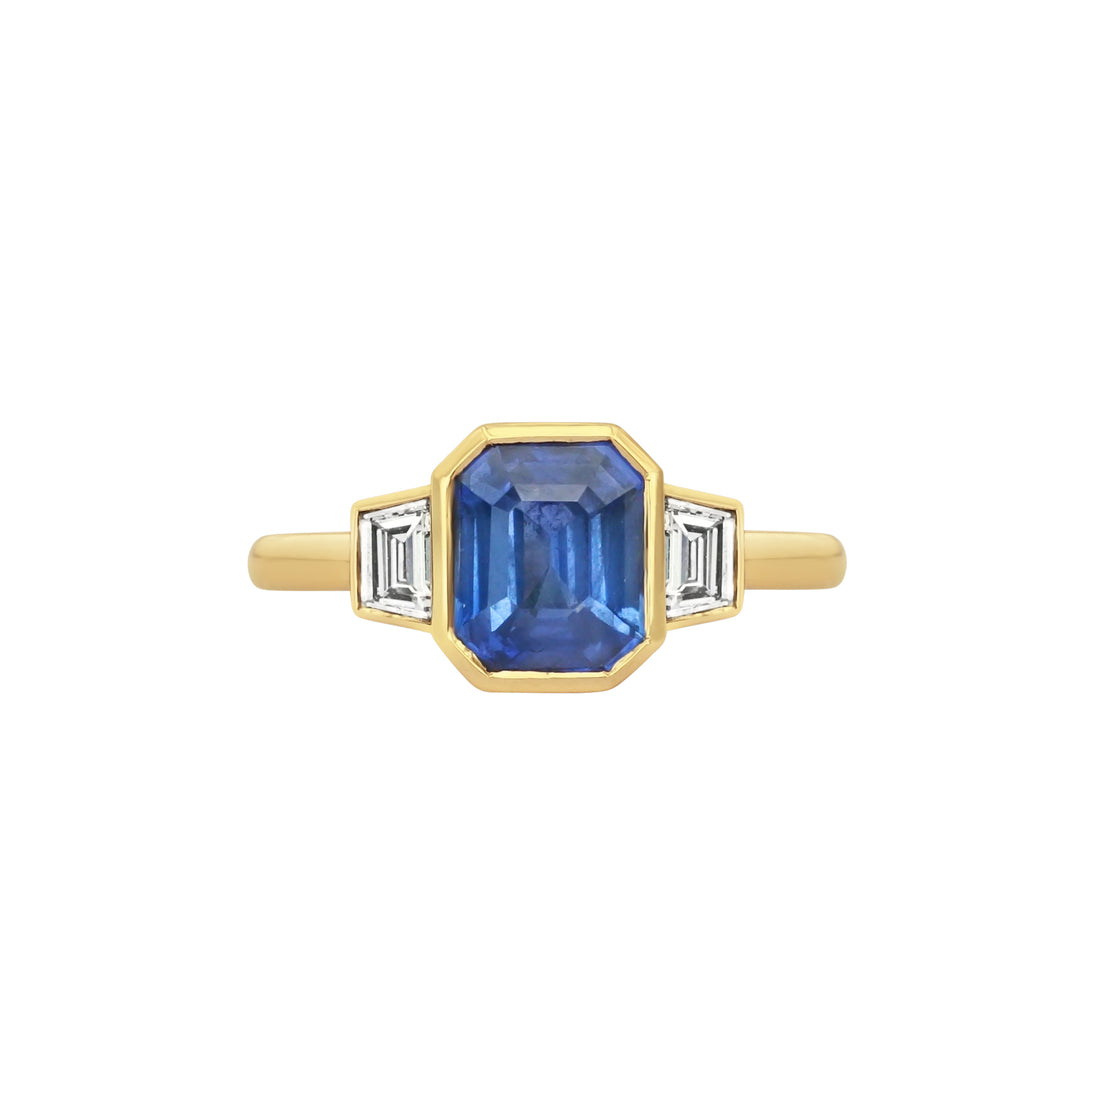  Sapphire and Trapezoid Diamond Ring by Gee Woods | The Cut London